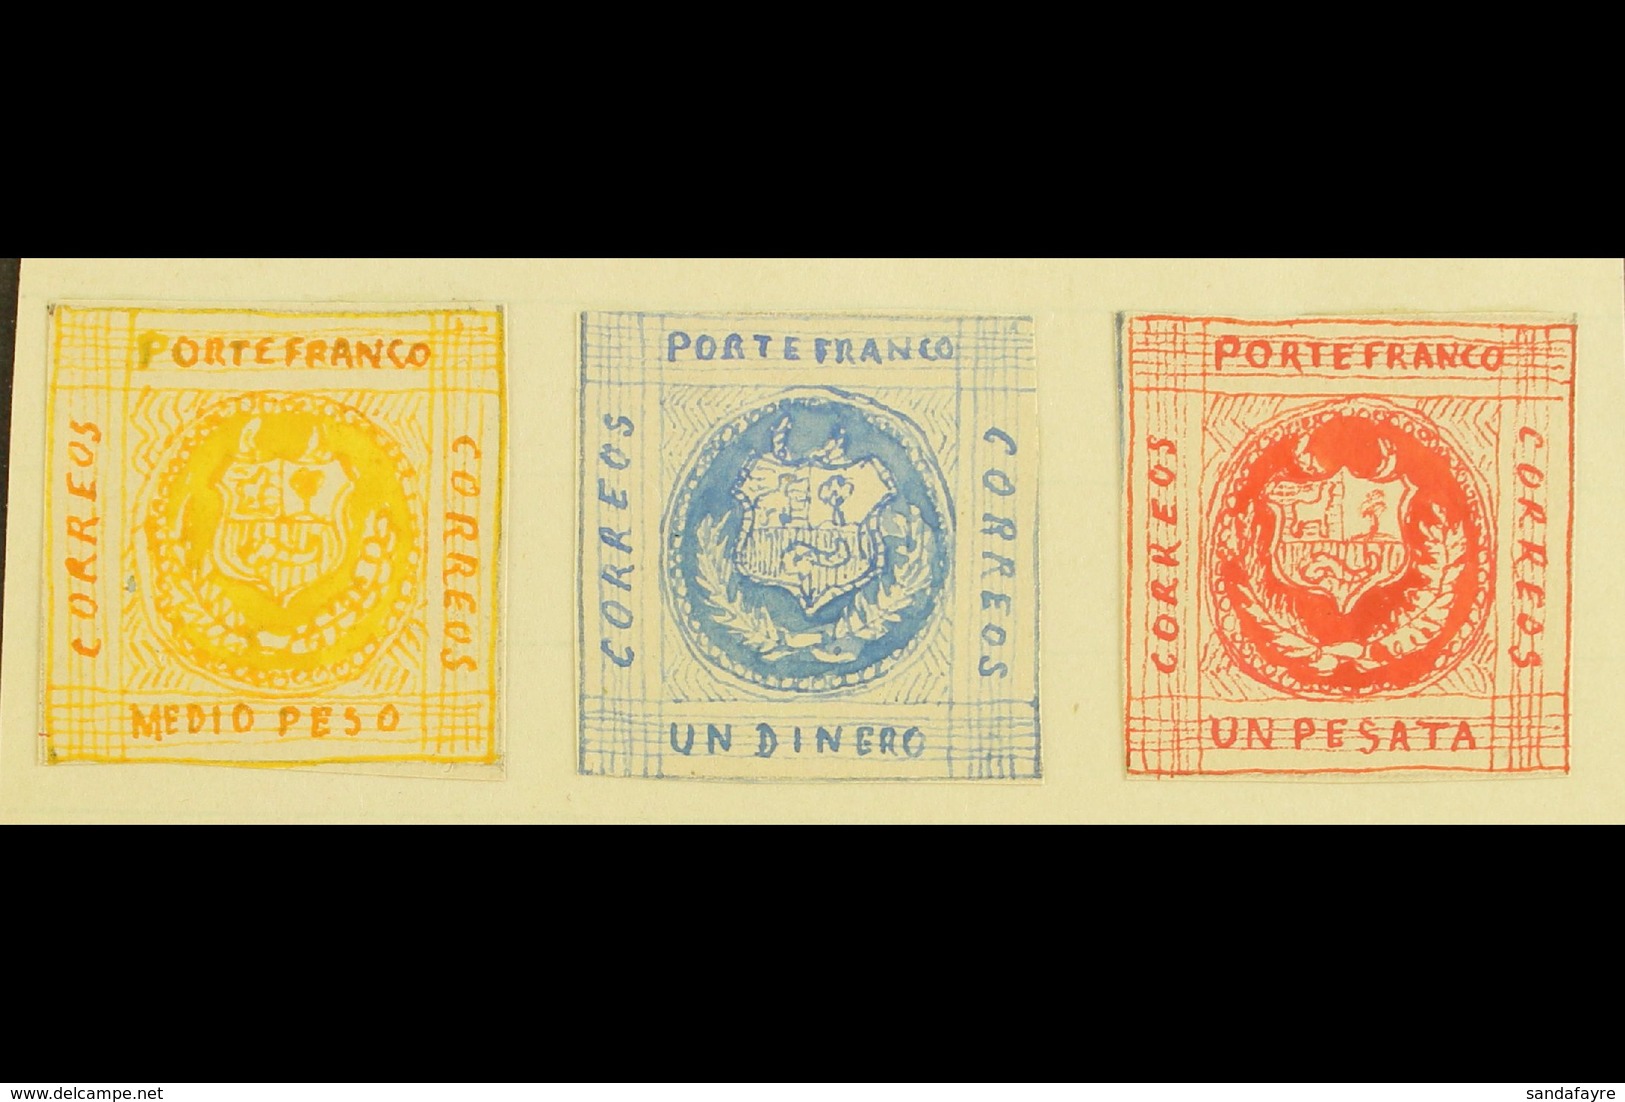 1861 HAND PAINTED STAMPS  Unique Miniature Artworks Created By A French "Timbrophile" In 1861. Three Values With Similar - Peru